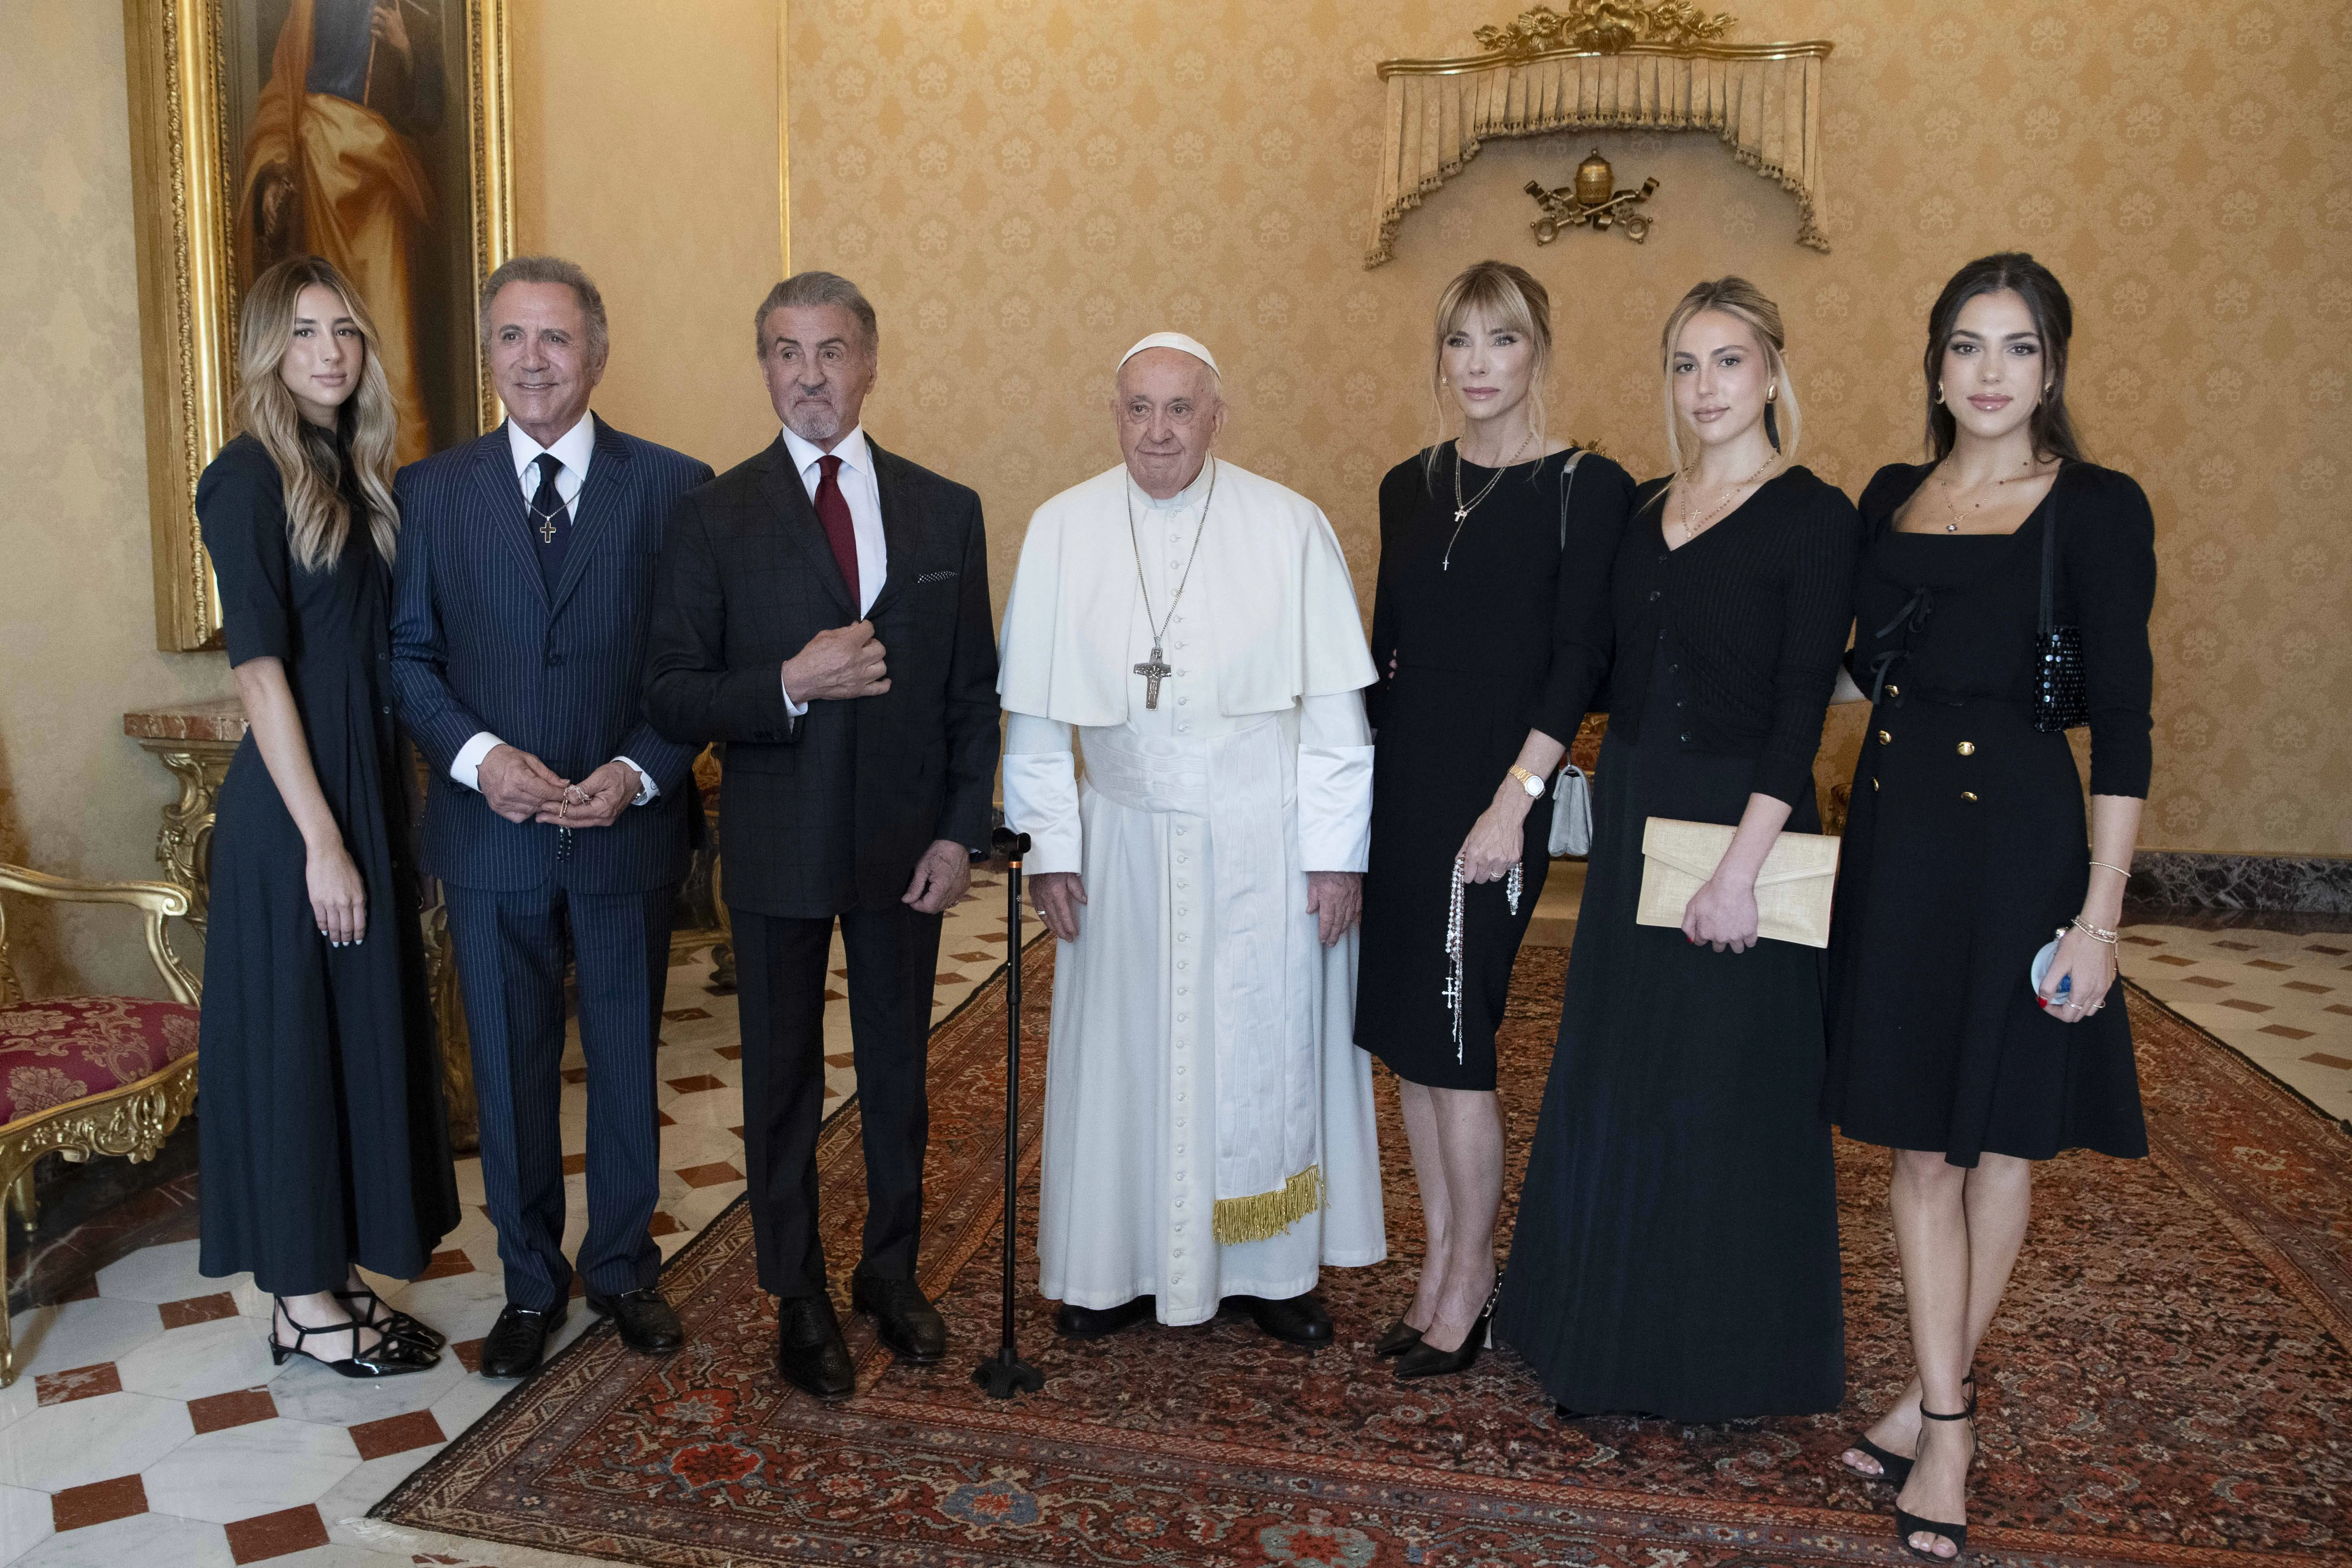 The actor and director Sylvester Stallone and members of his family had an audience with Pope Francis at the Vatican on Sept. 8, 2023. Vatican Media